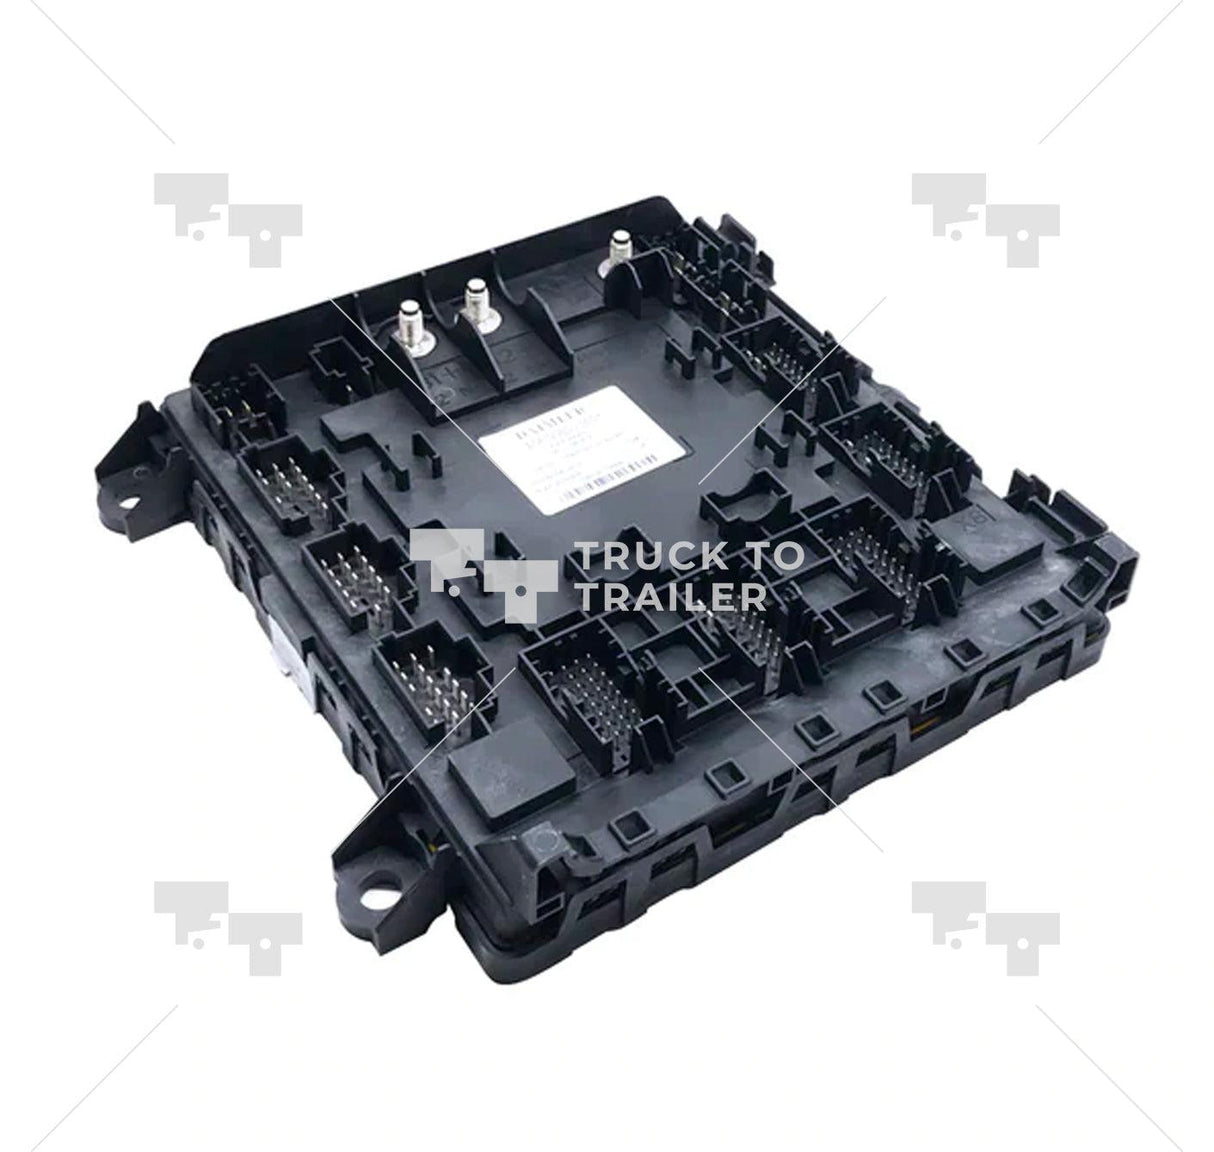 A06-95632-004 Oem Freightliner® Body Controller Config Ssam Module - Truck To Trailer